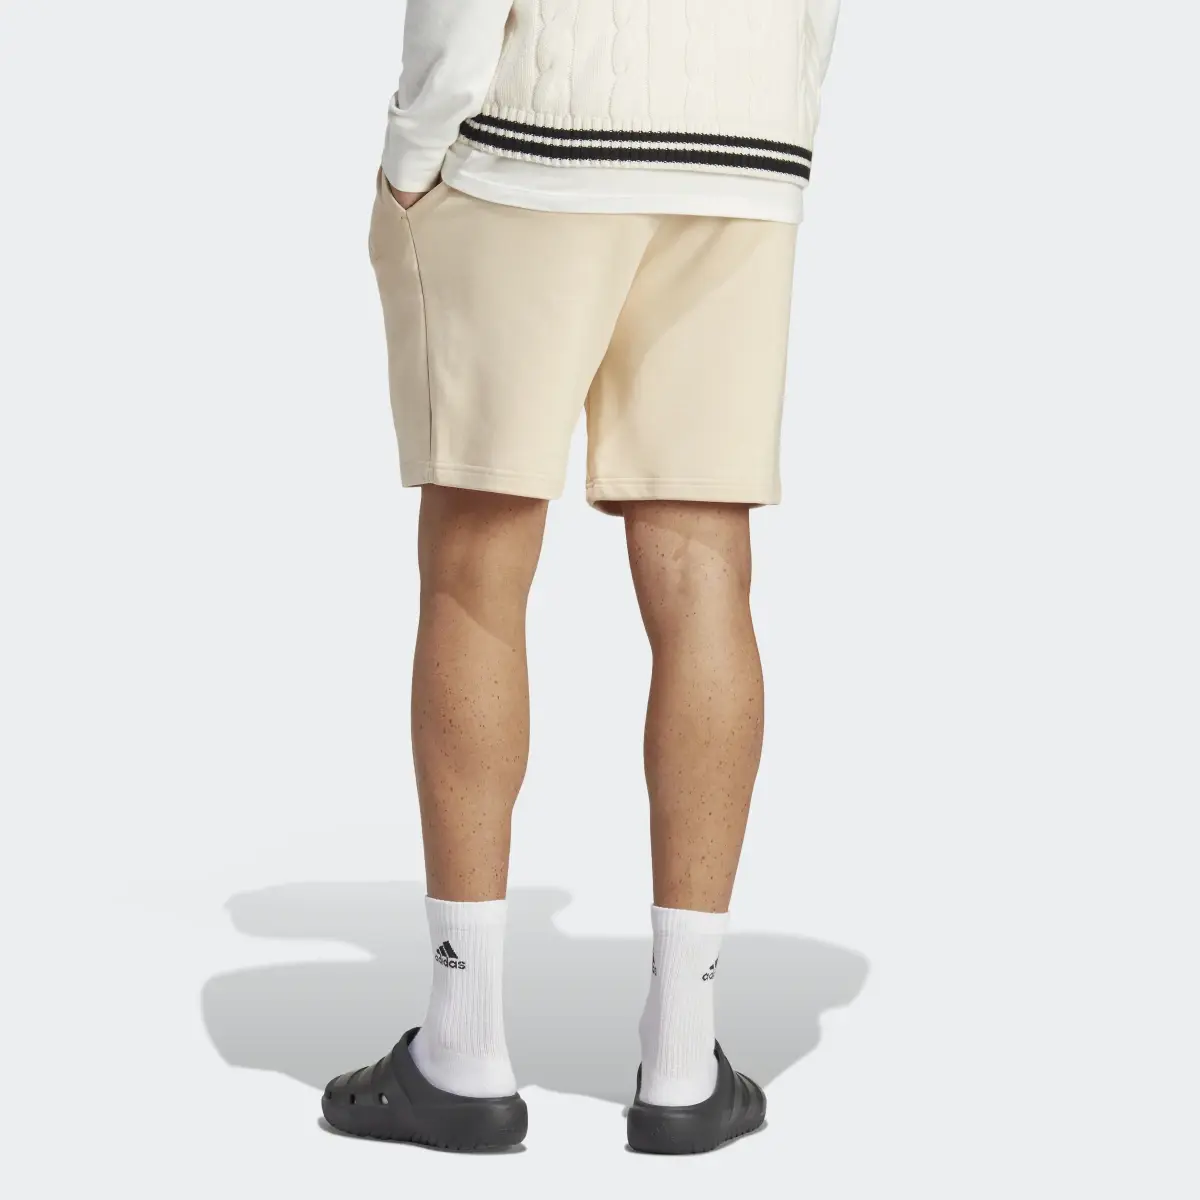 Adidas ALL SZN French Terry Shorts. 2